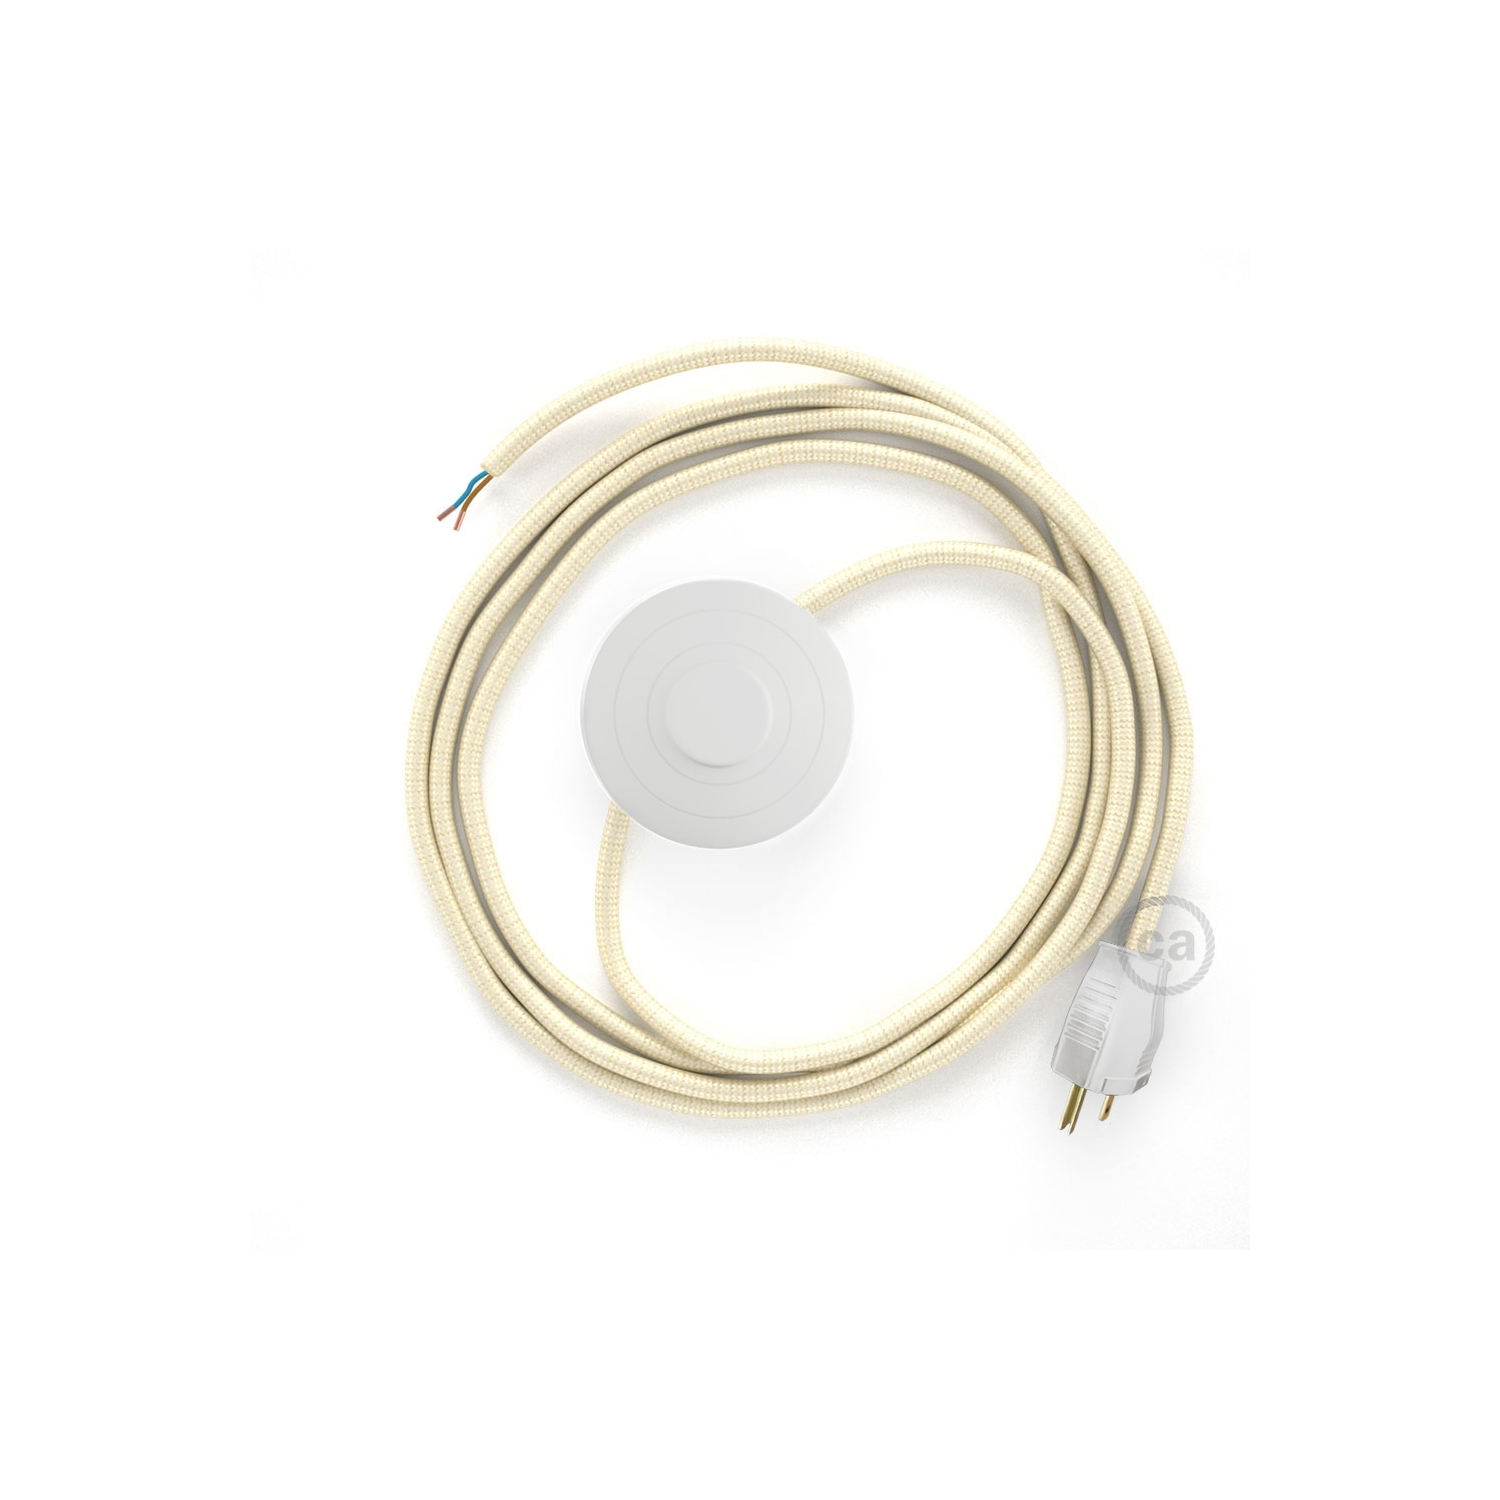 Power Cord with foot switch, RM00 Ivory Rayon - Choose color of switch/plug